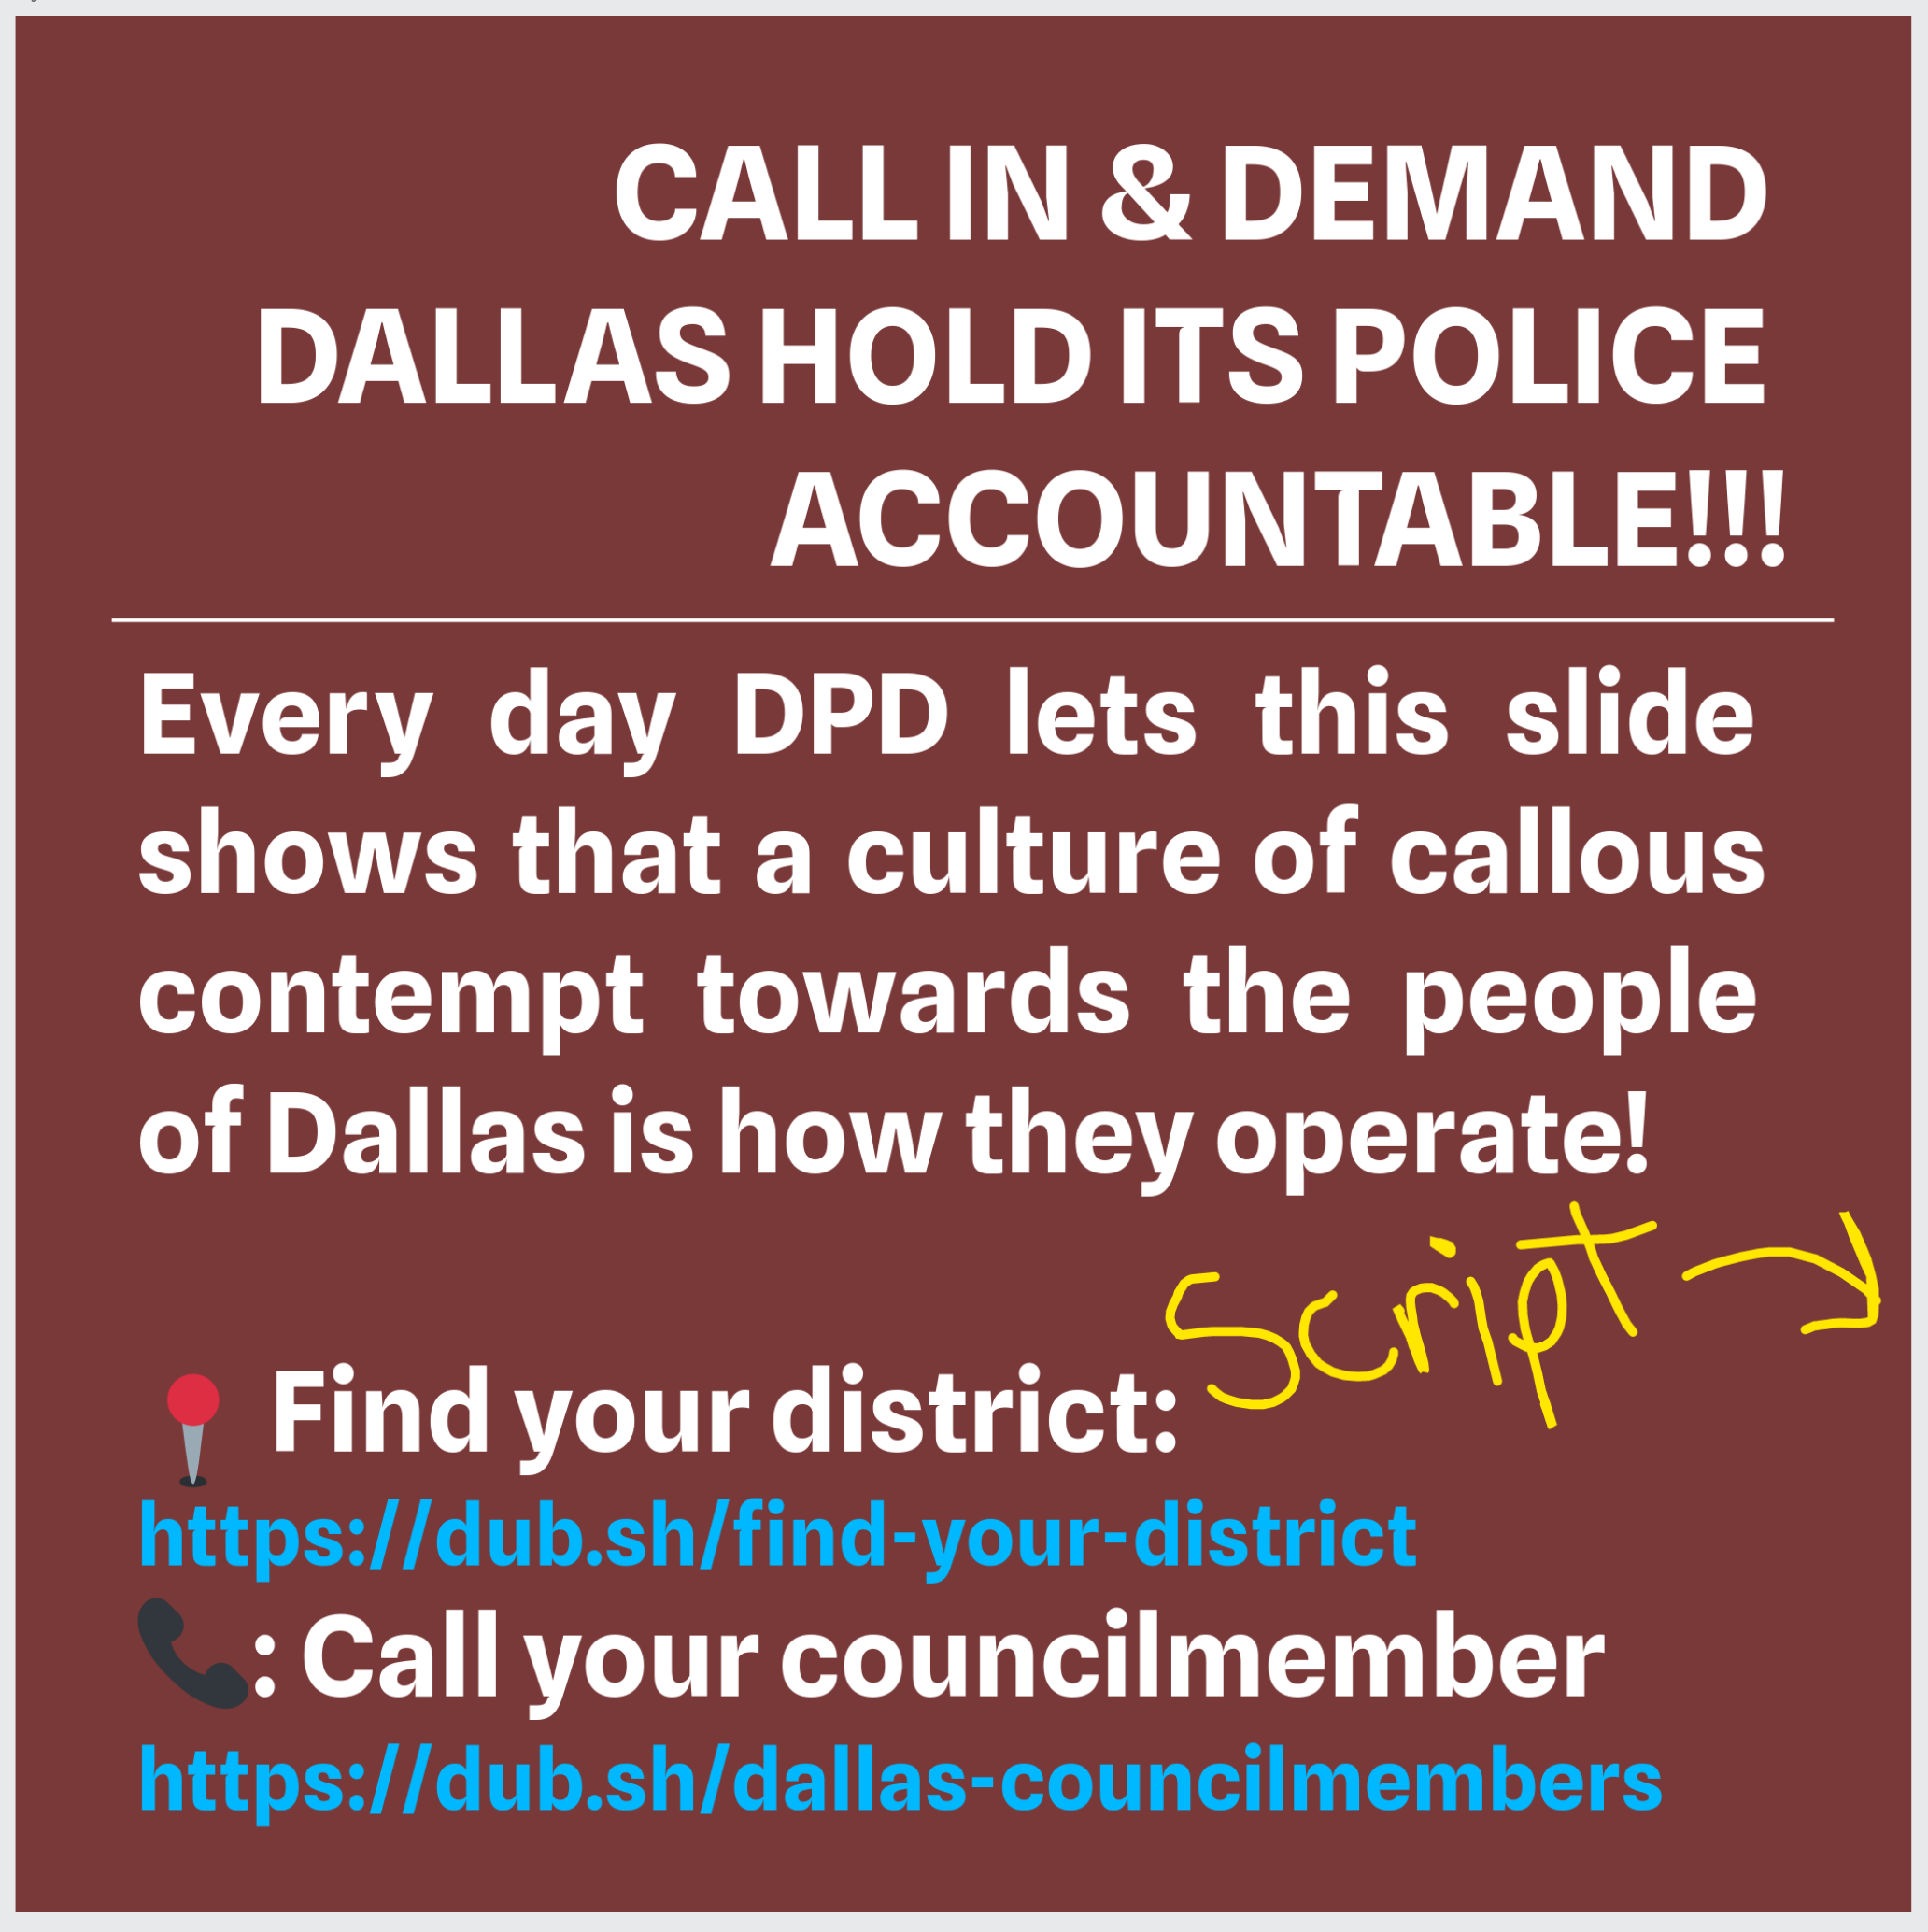 Defend DyNell as DPD Delays! Pack City Hall & Flood With Calls!